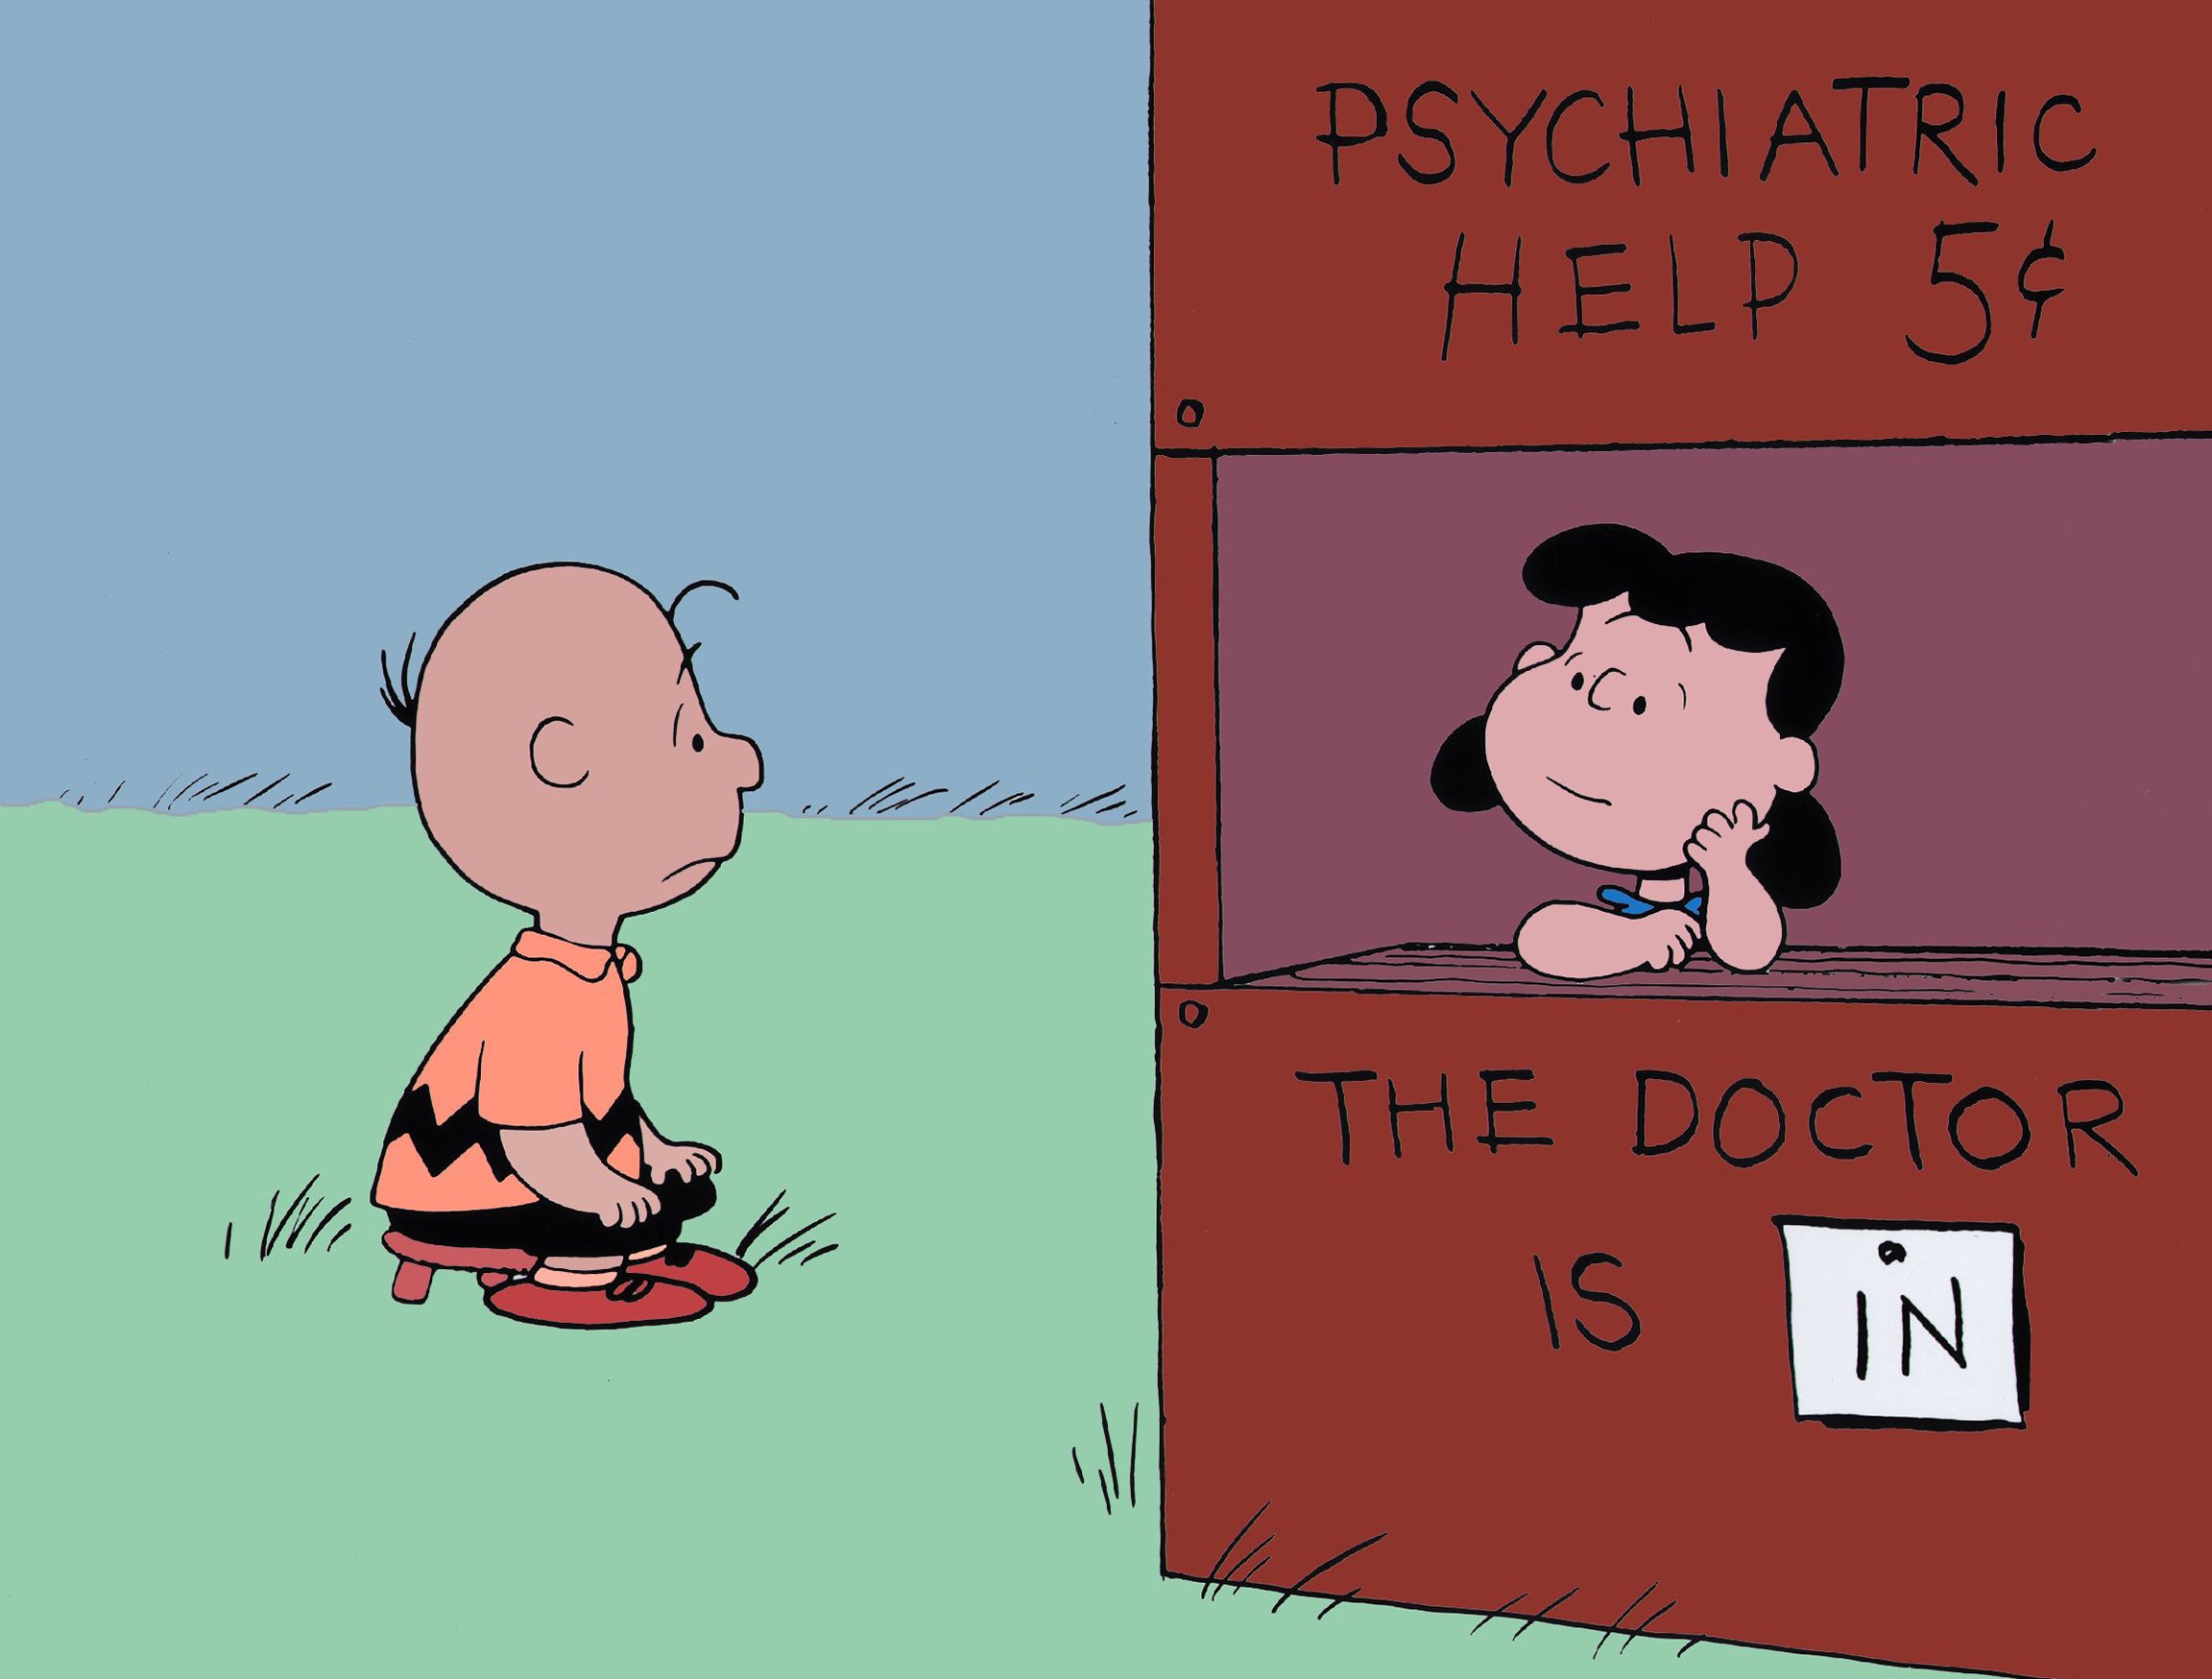 Charlie Brown at Lucy's psychiatrist office